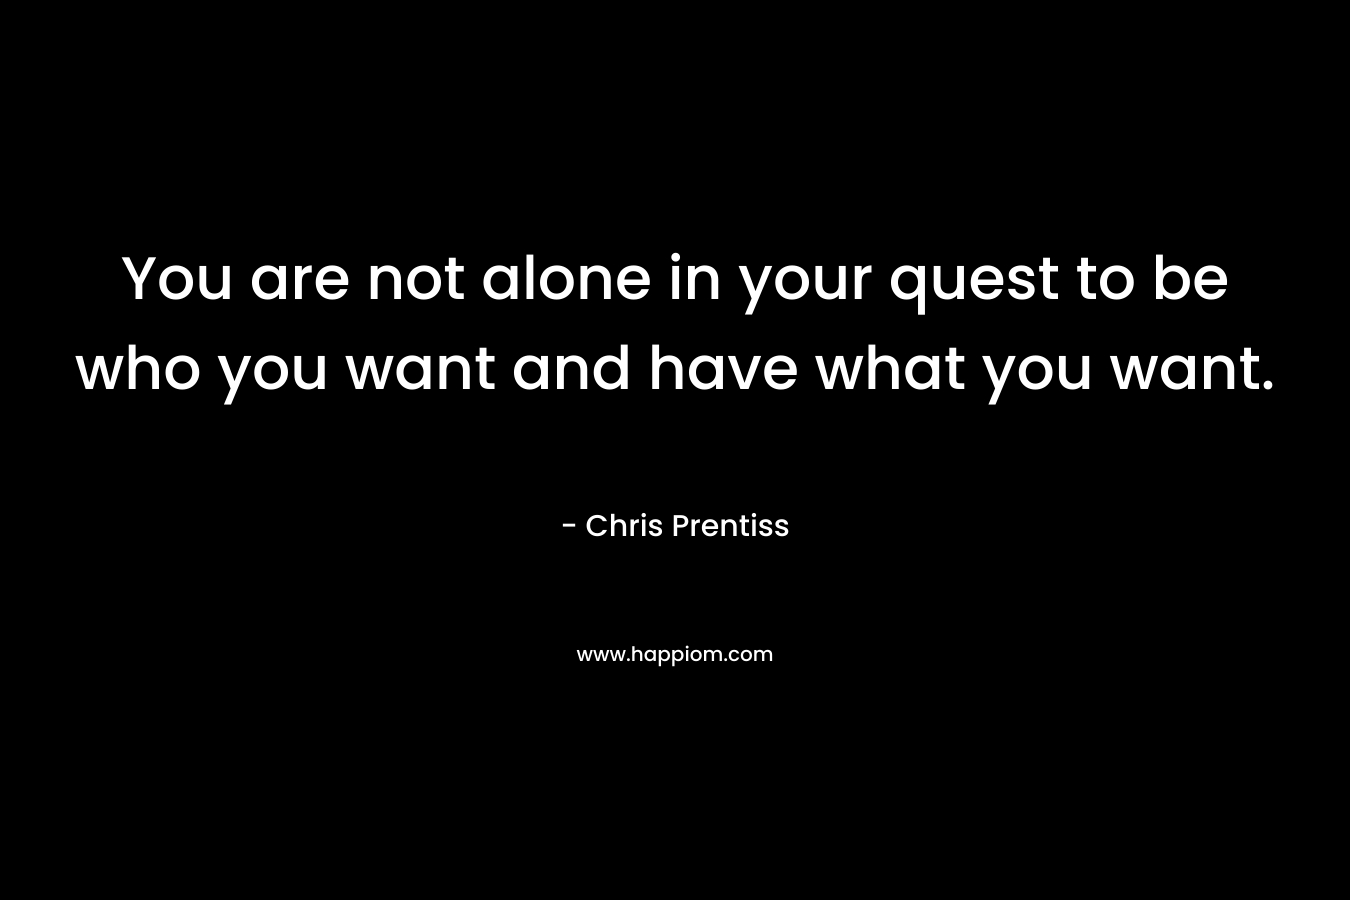 You are not alone in your quest to be who you want and have what you want. – Chris Prentiss